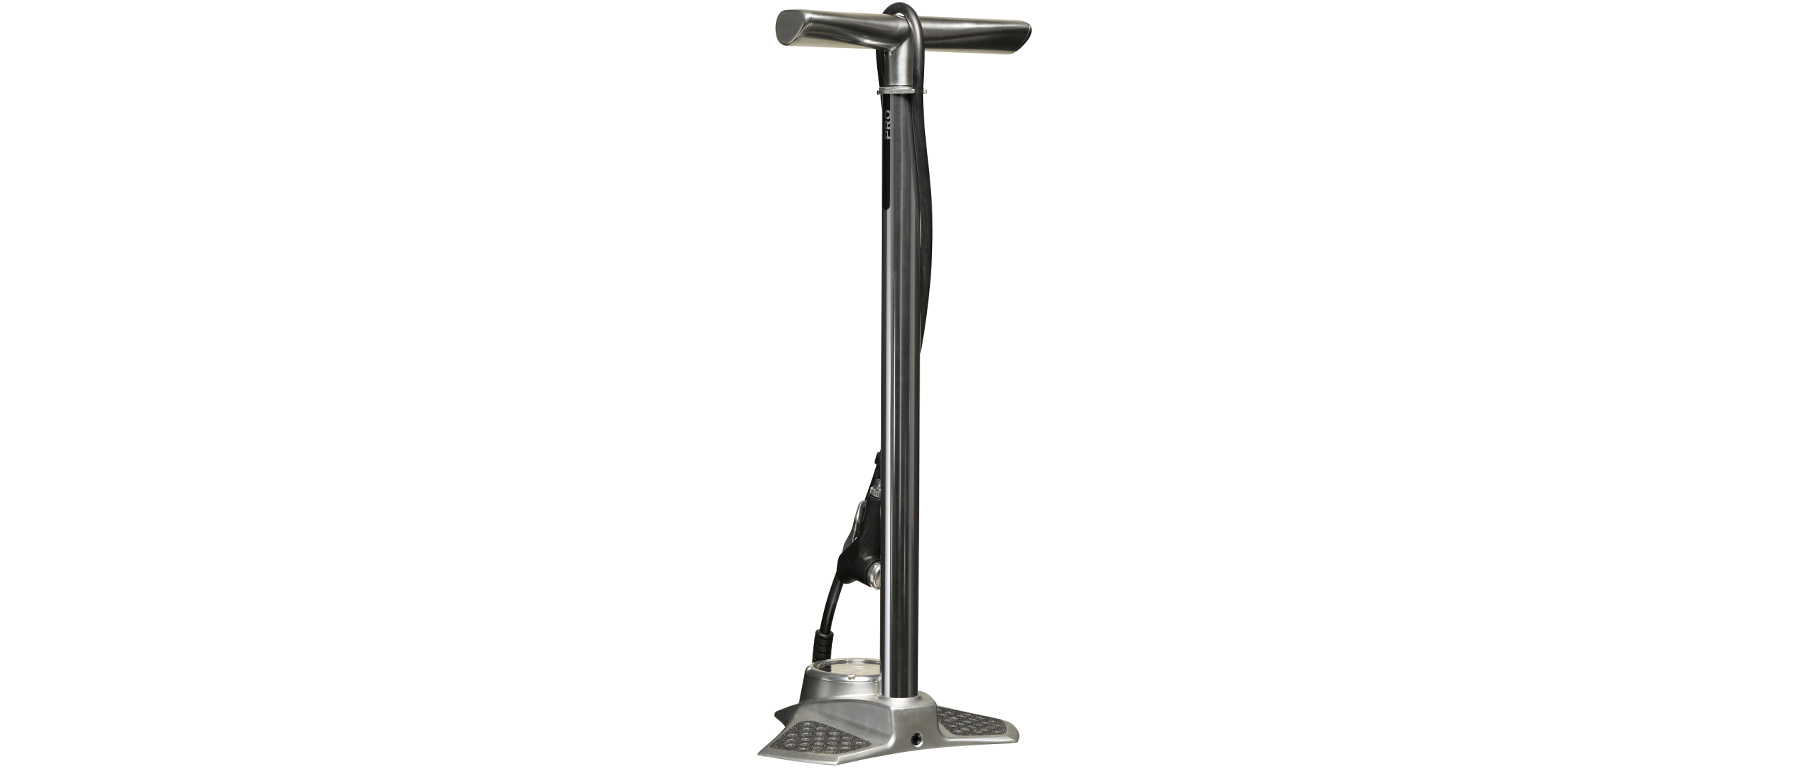 Specialized Air Tool Pro Floor Pump